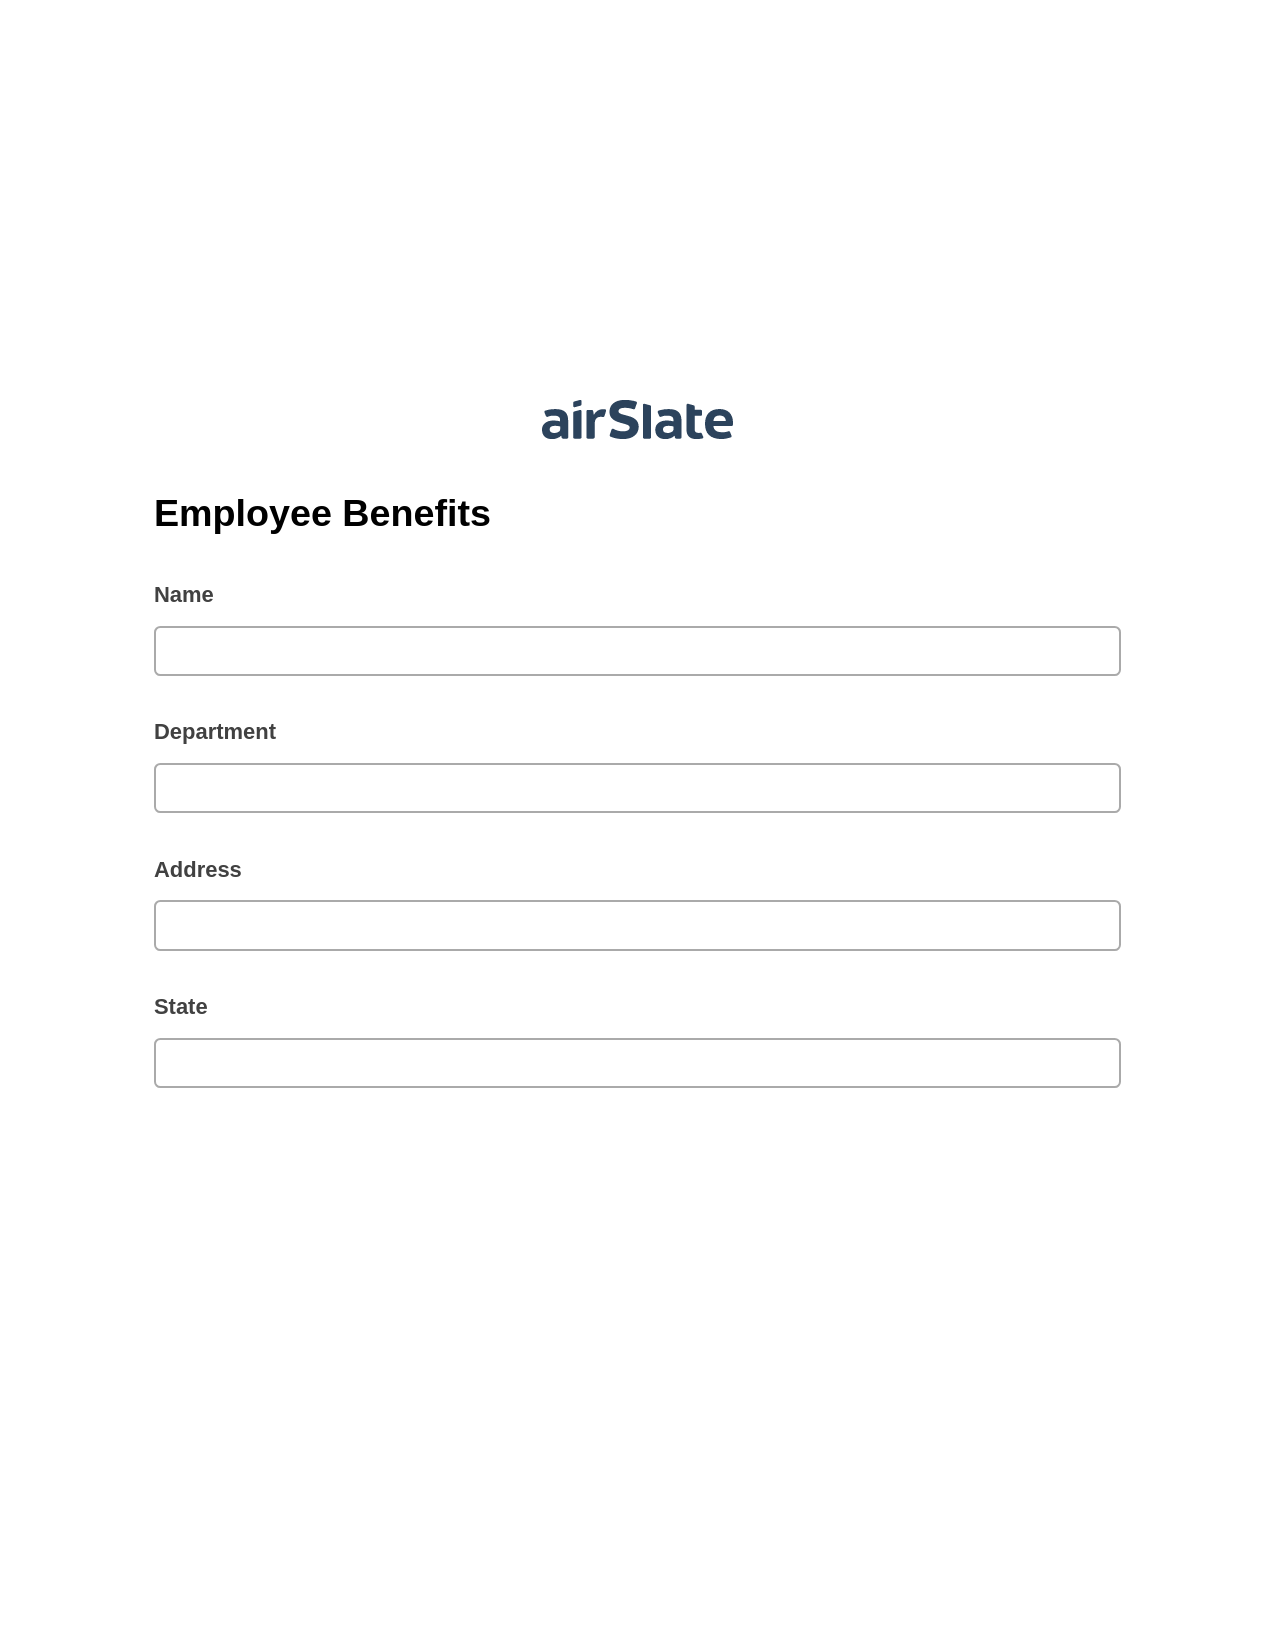 Employee Benefits Pre-fill Slate from MS Dynamics 365 Records Bot, Mailchimp add recipient to audience Bot, Export to Excel 365 Bot